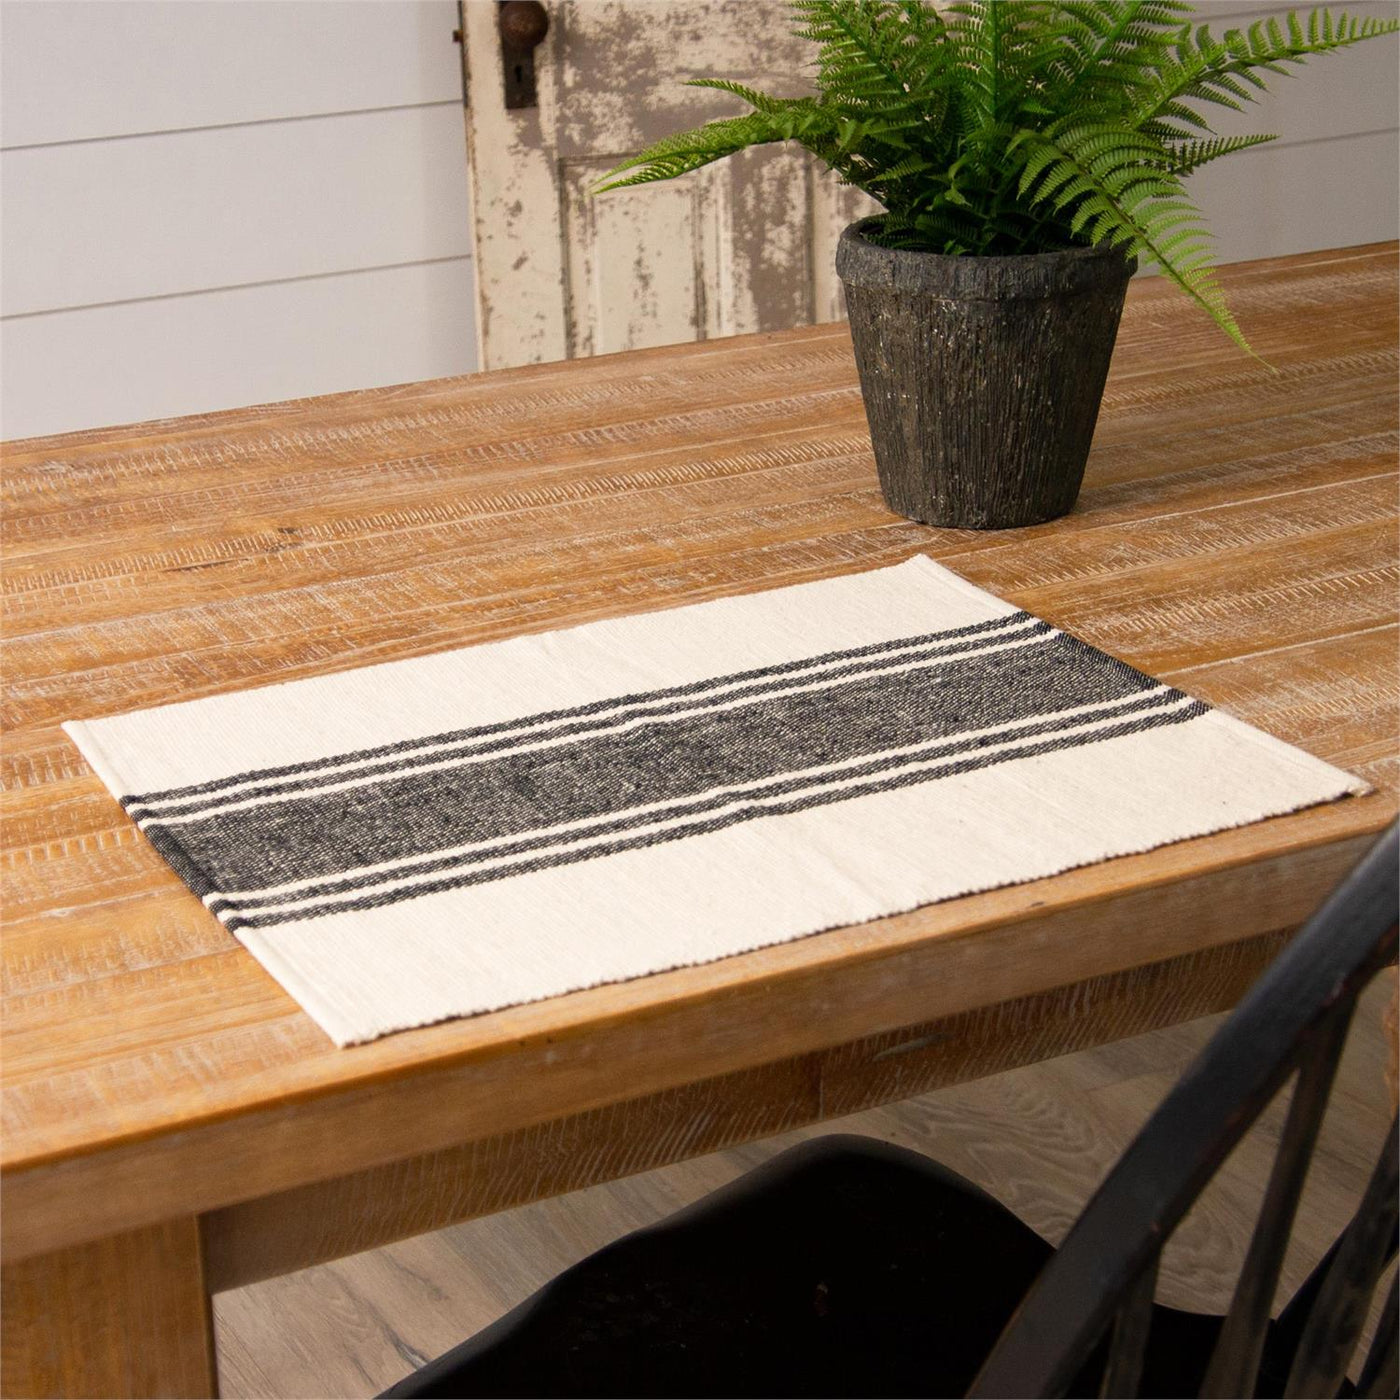 Set of 4 Grain Sack Grey Striped Placemats